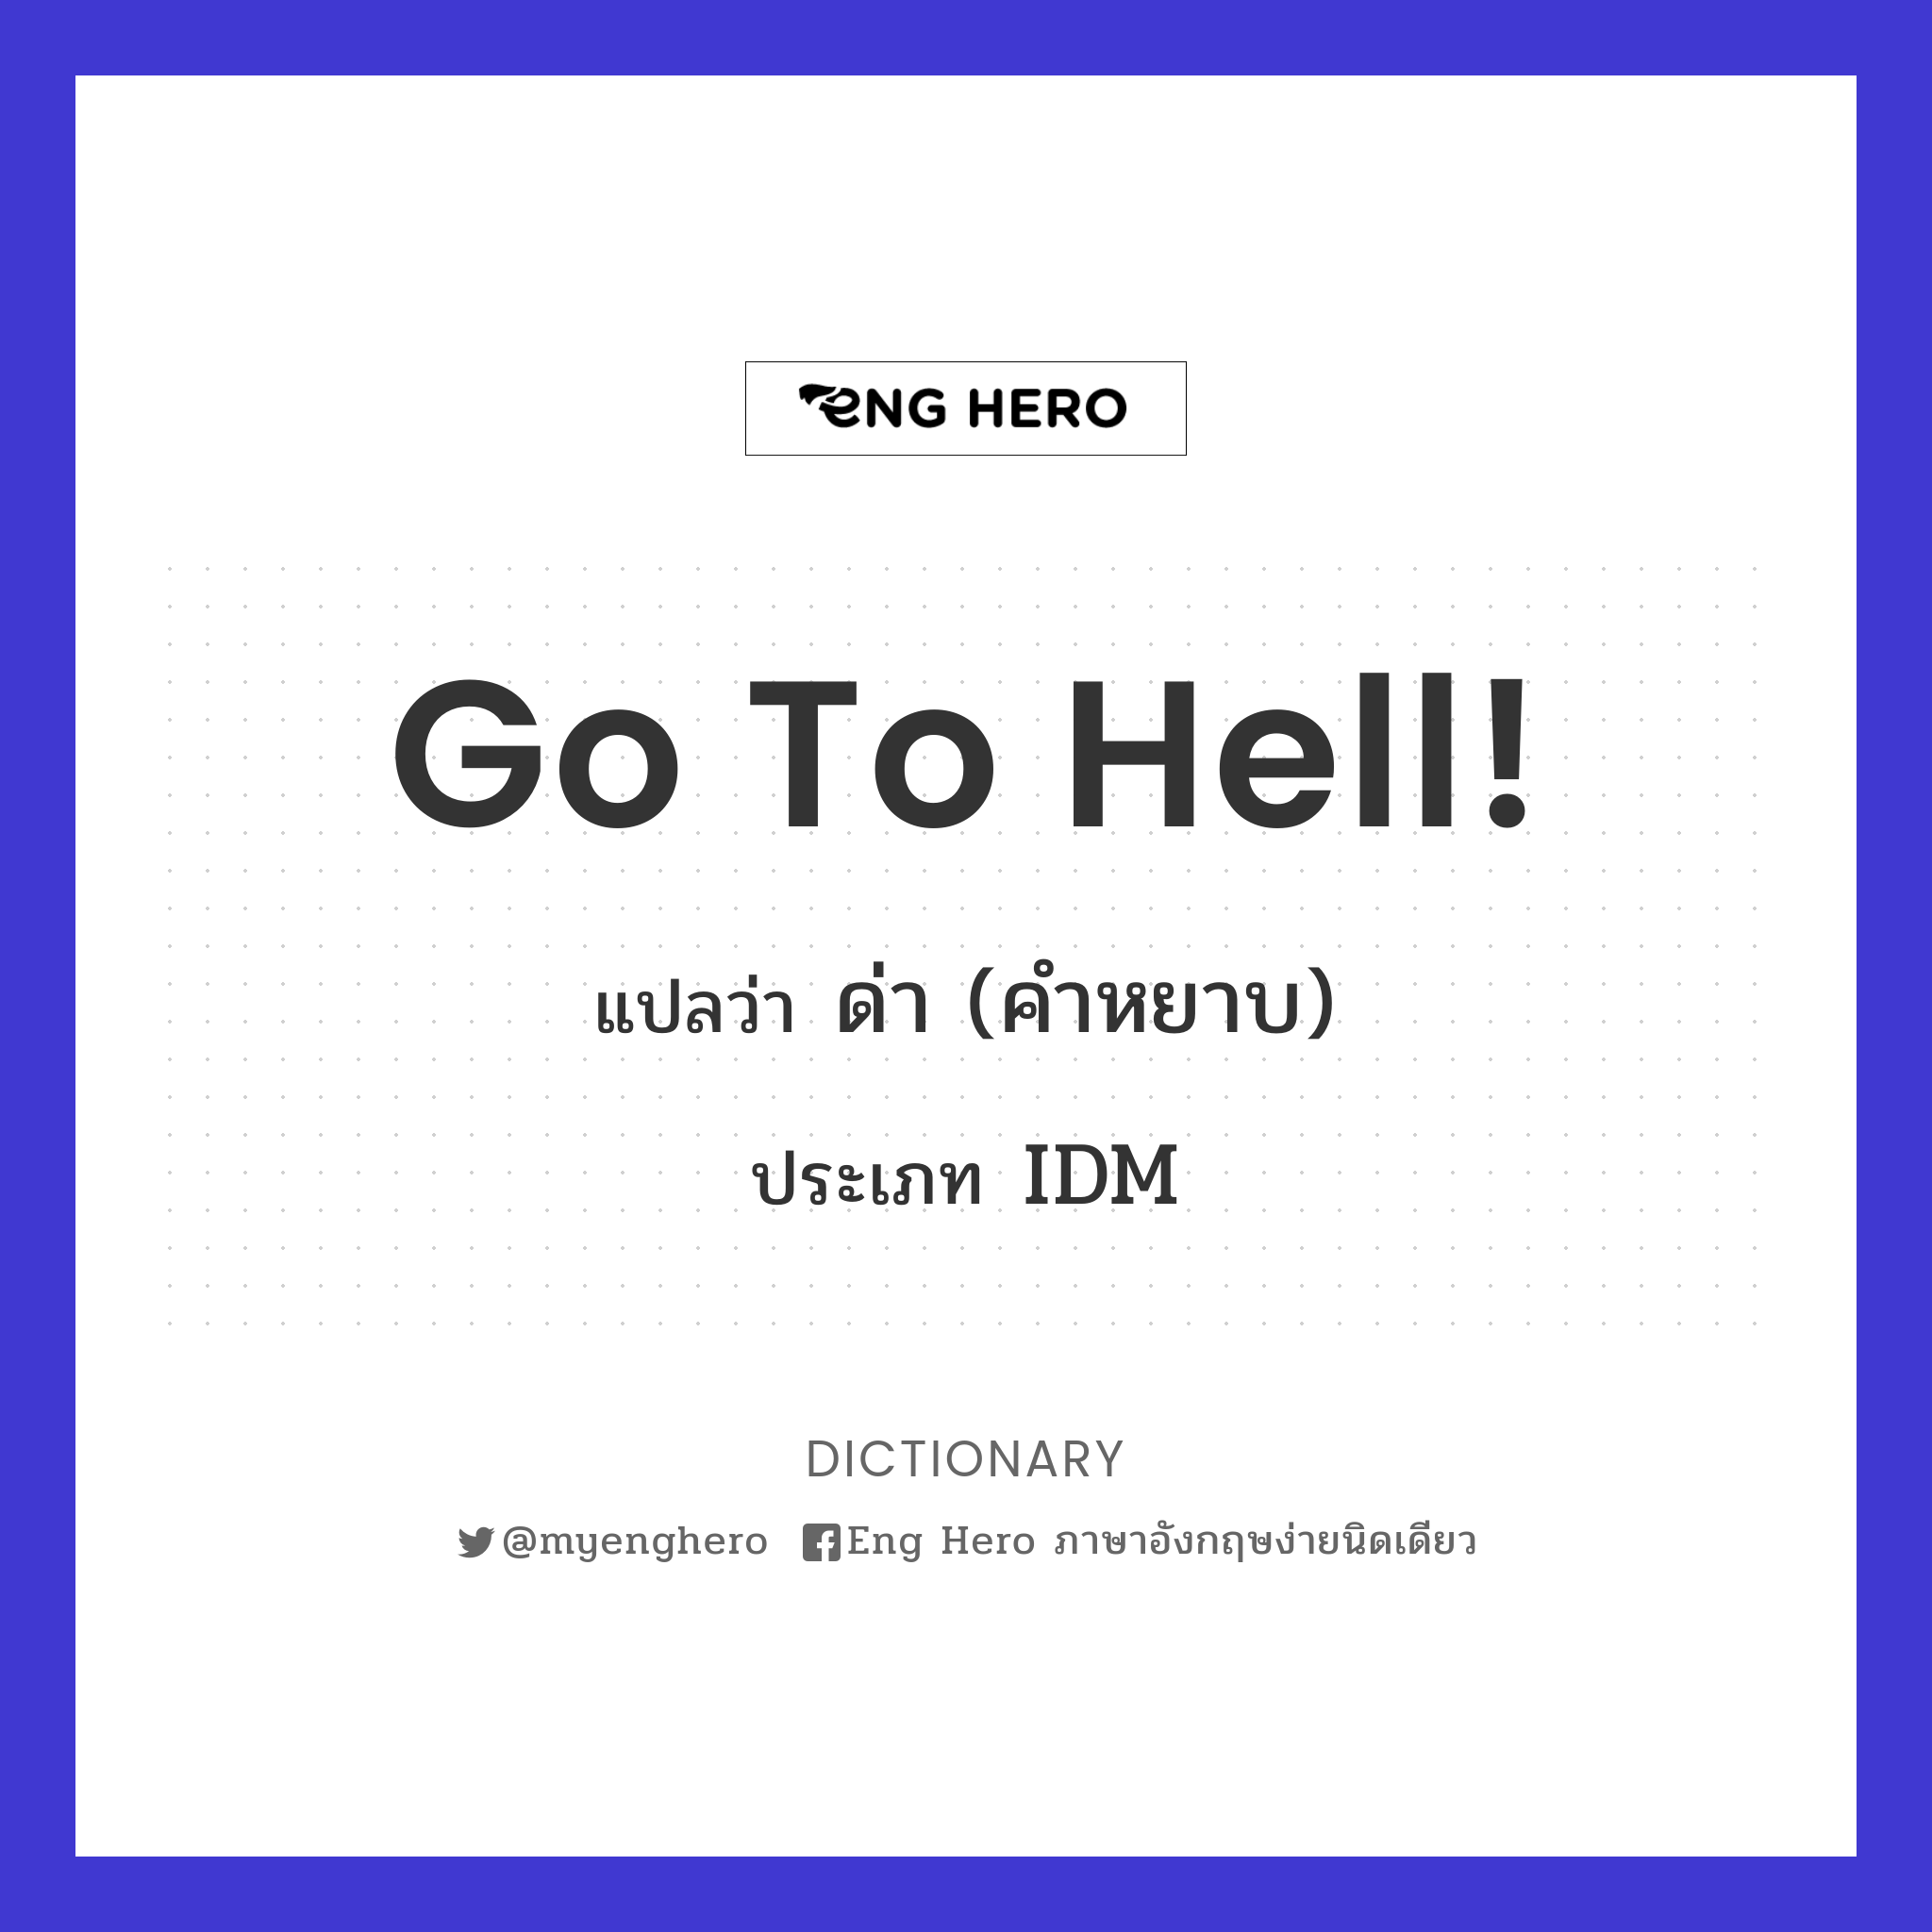 go to hell!